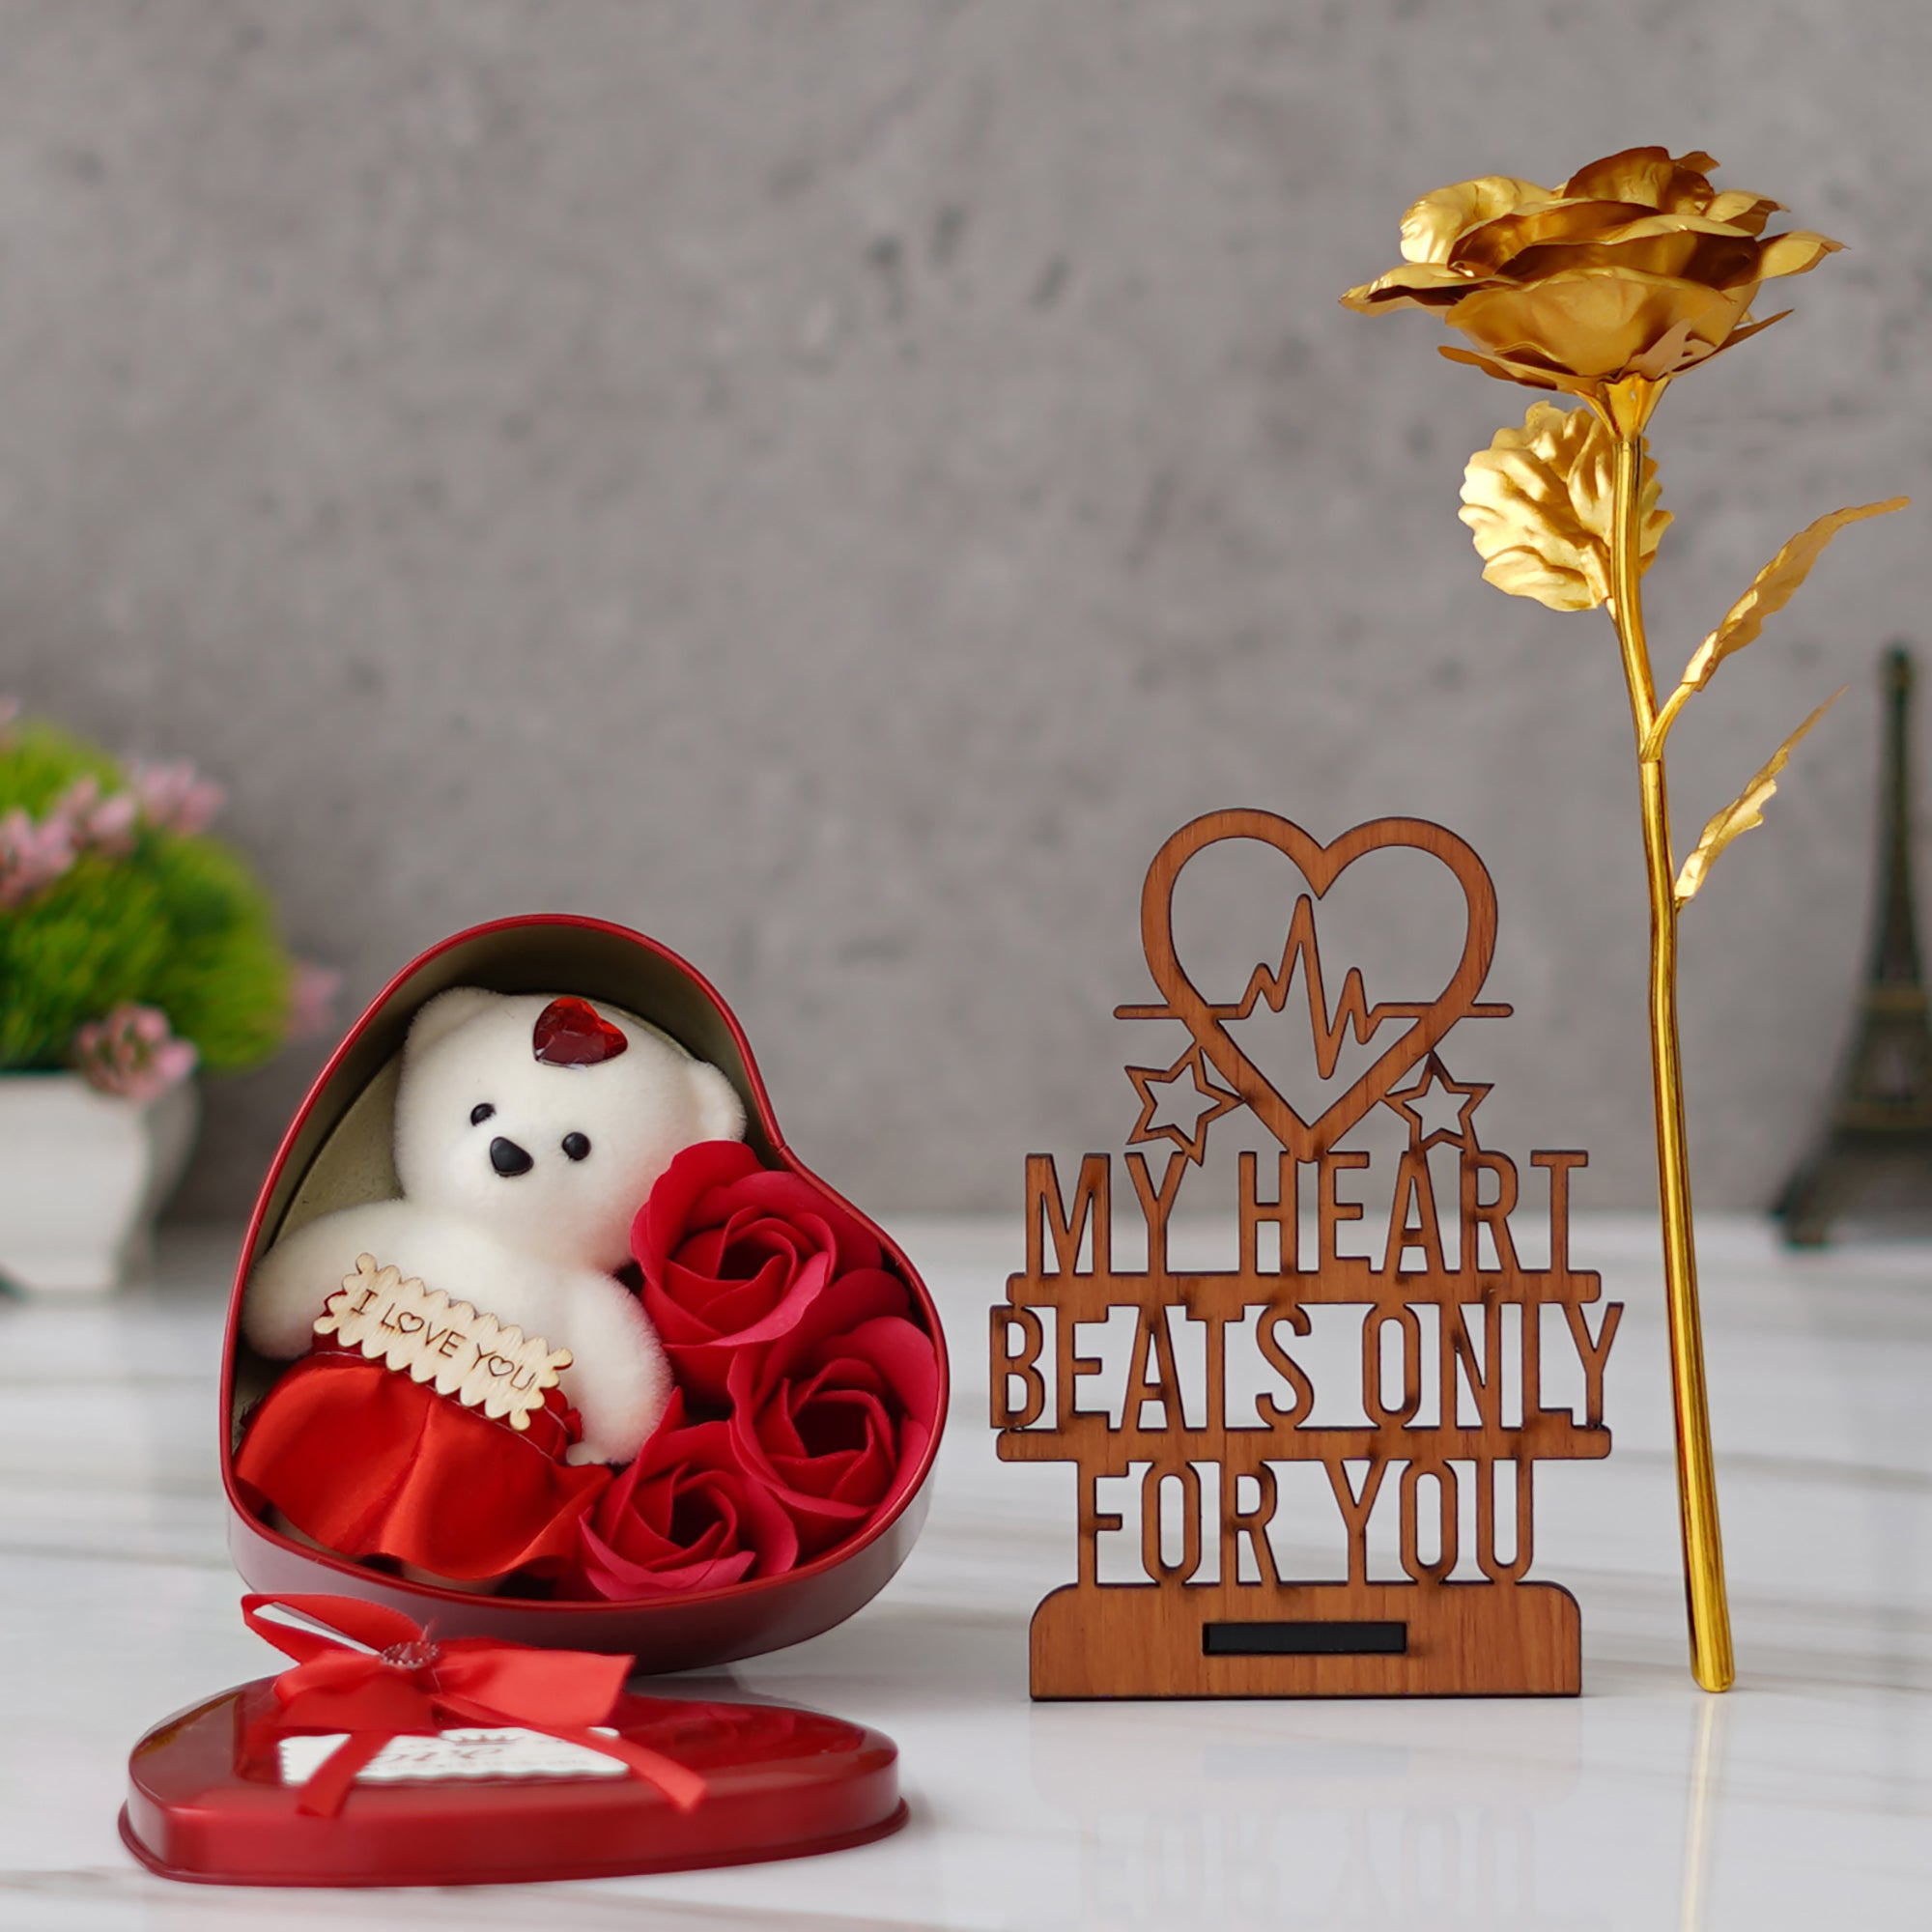 Valentine Combo of Golden Rose Gift Set, "My Heart Beats Only For You" Wooden Showpiece With Stand, Heart Shaped Gift Box Set with White Teddy and Red Roses